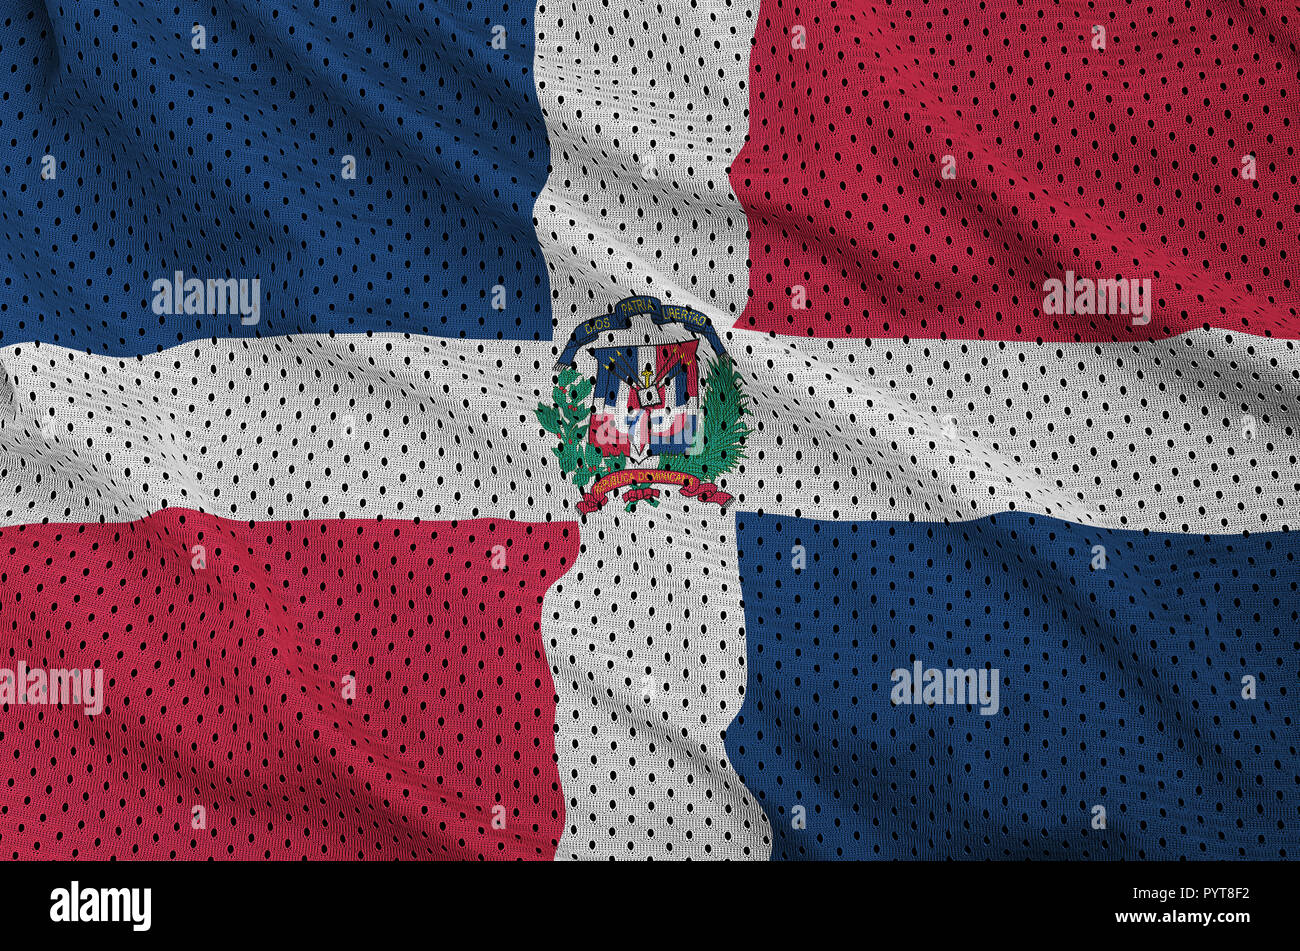 Dominican Republic flag printed on a polyester nylon sportswear mesh fabric with some folds Stock Photo